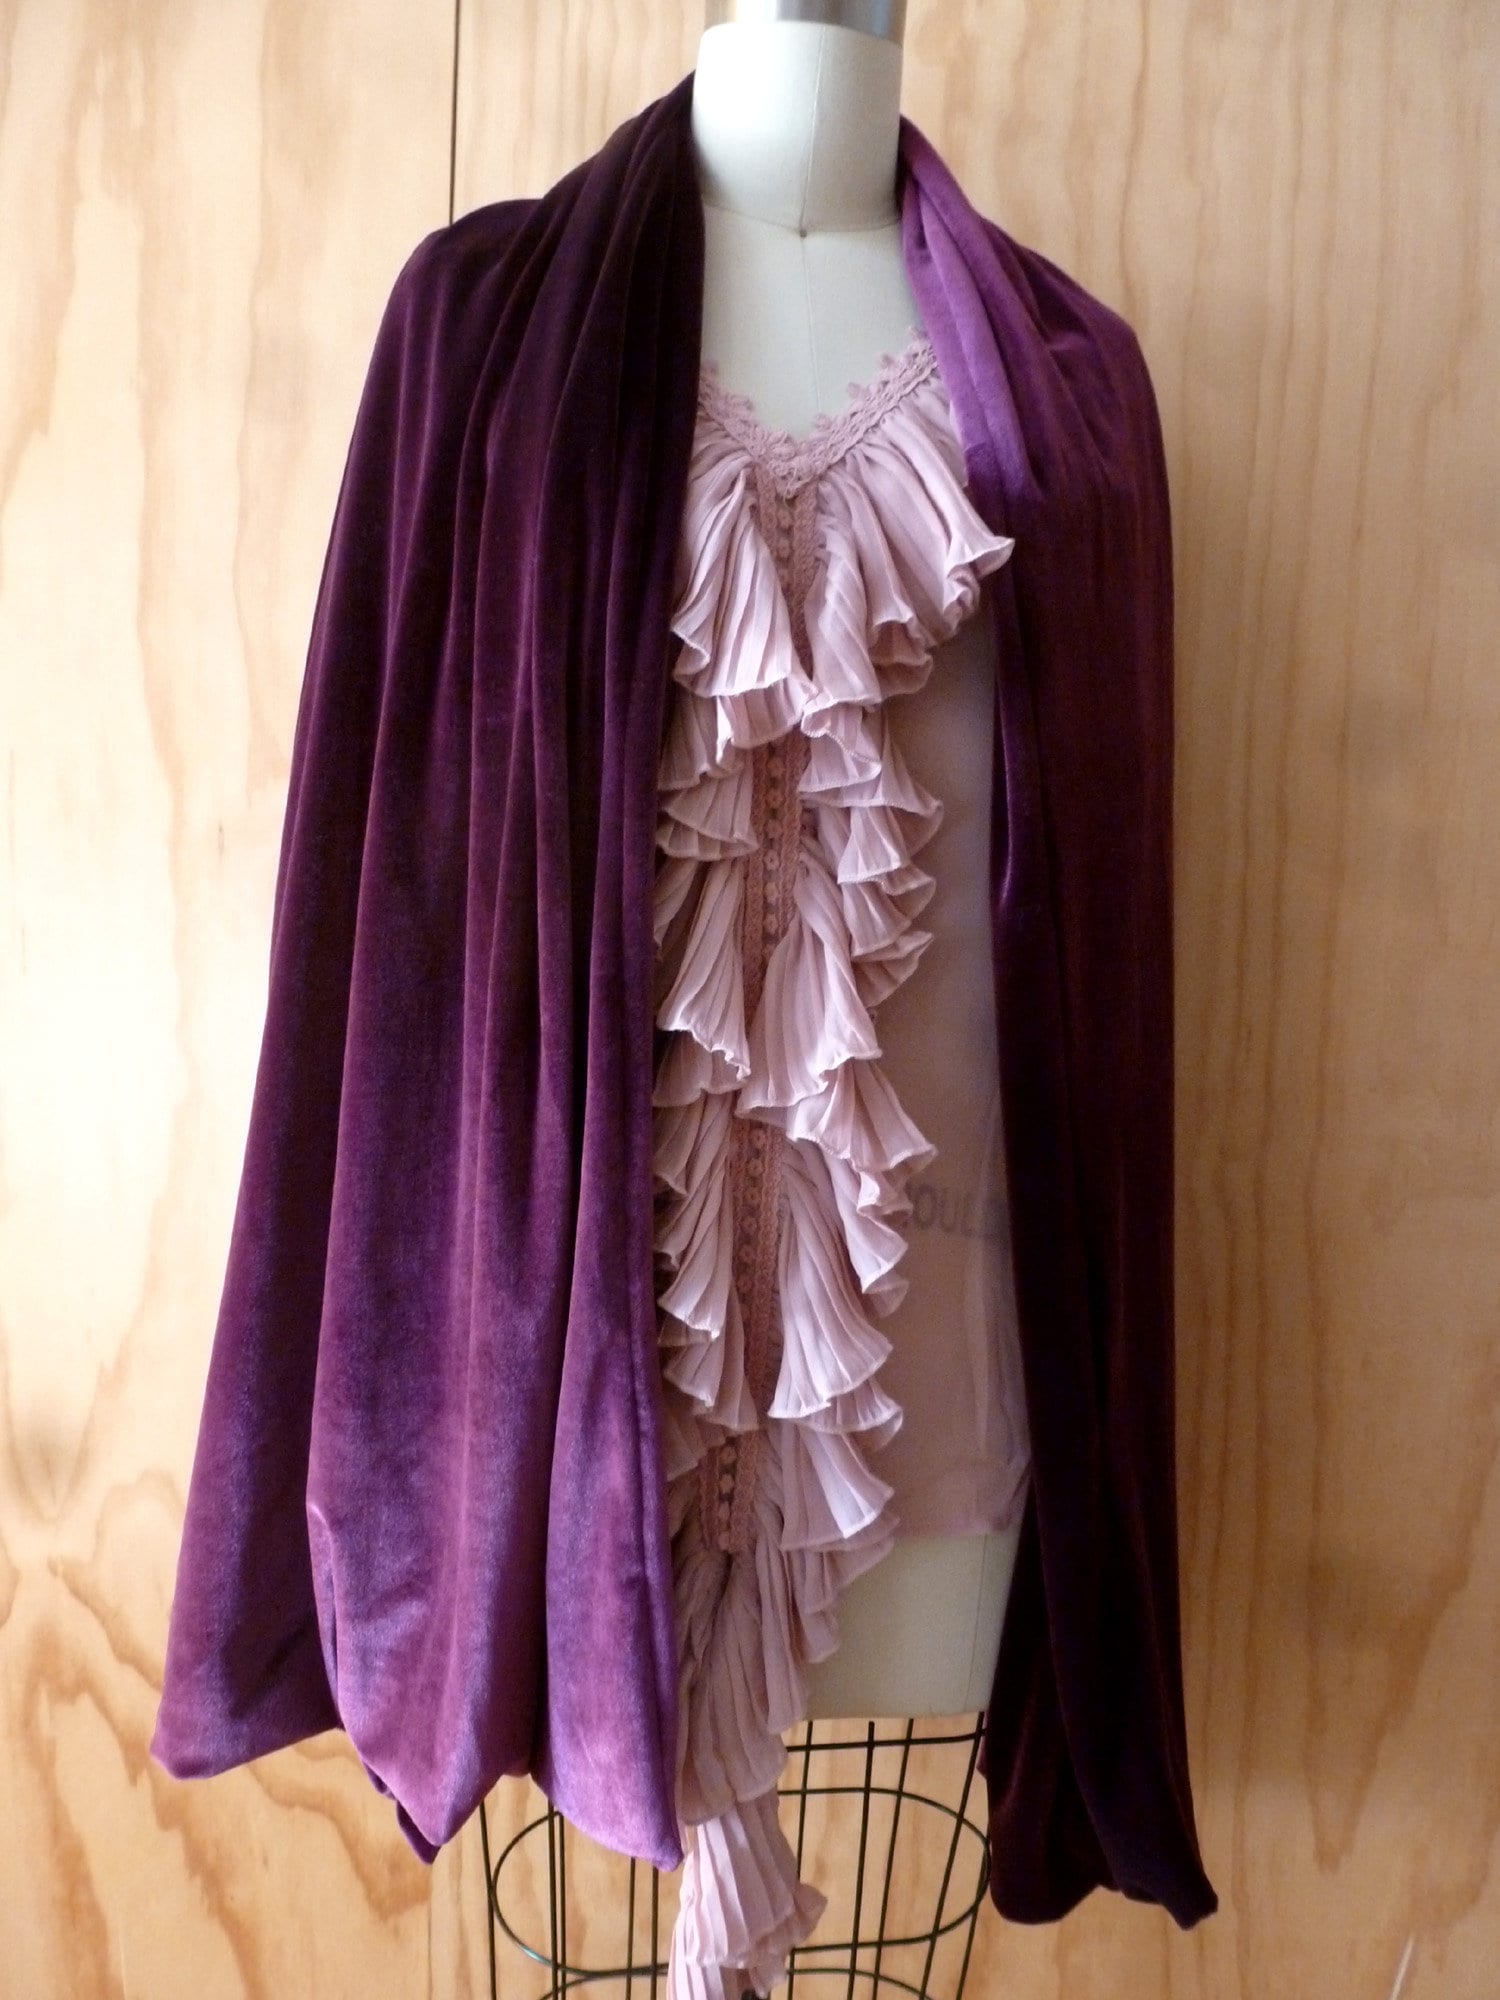 Magenta Velvet shawl3 sizes available in drop down boxfree shipping in U.S.